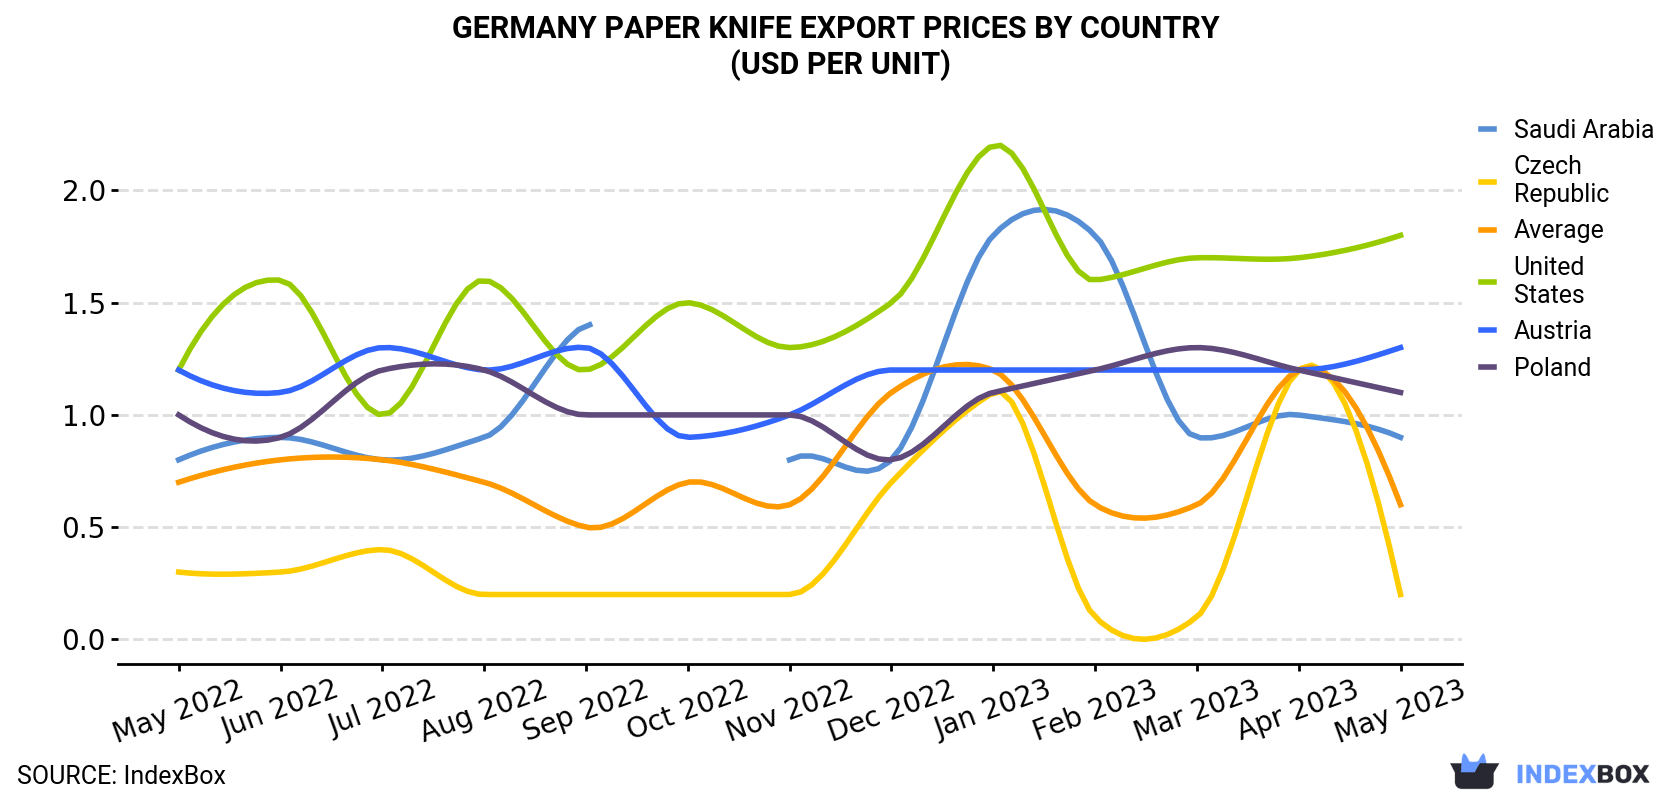 Germany Paper Knife Export Prices By Country (USD Per Unit)